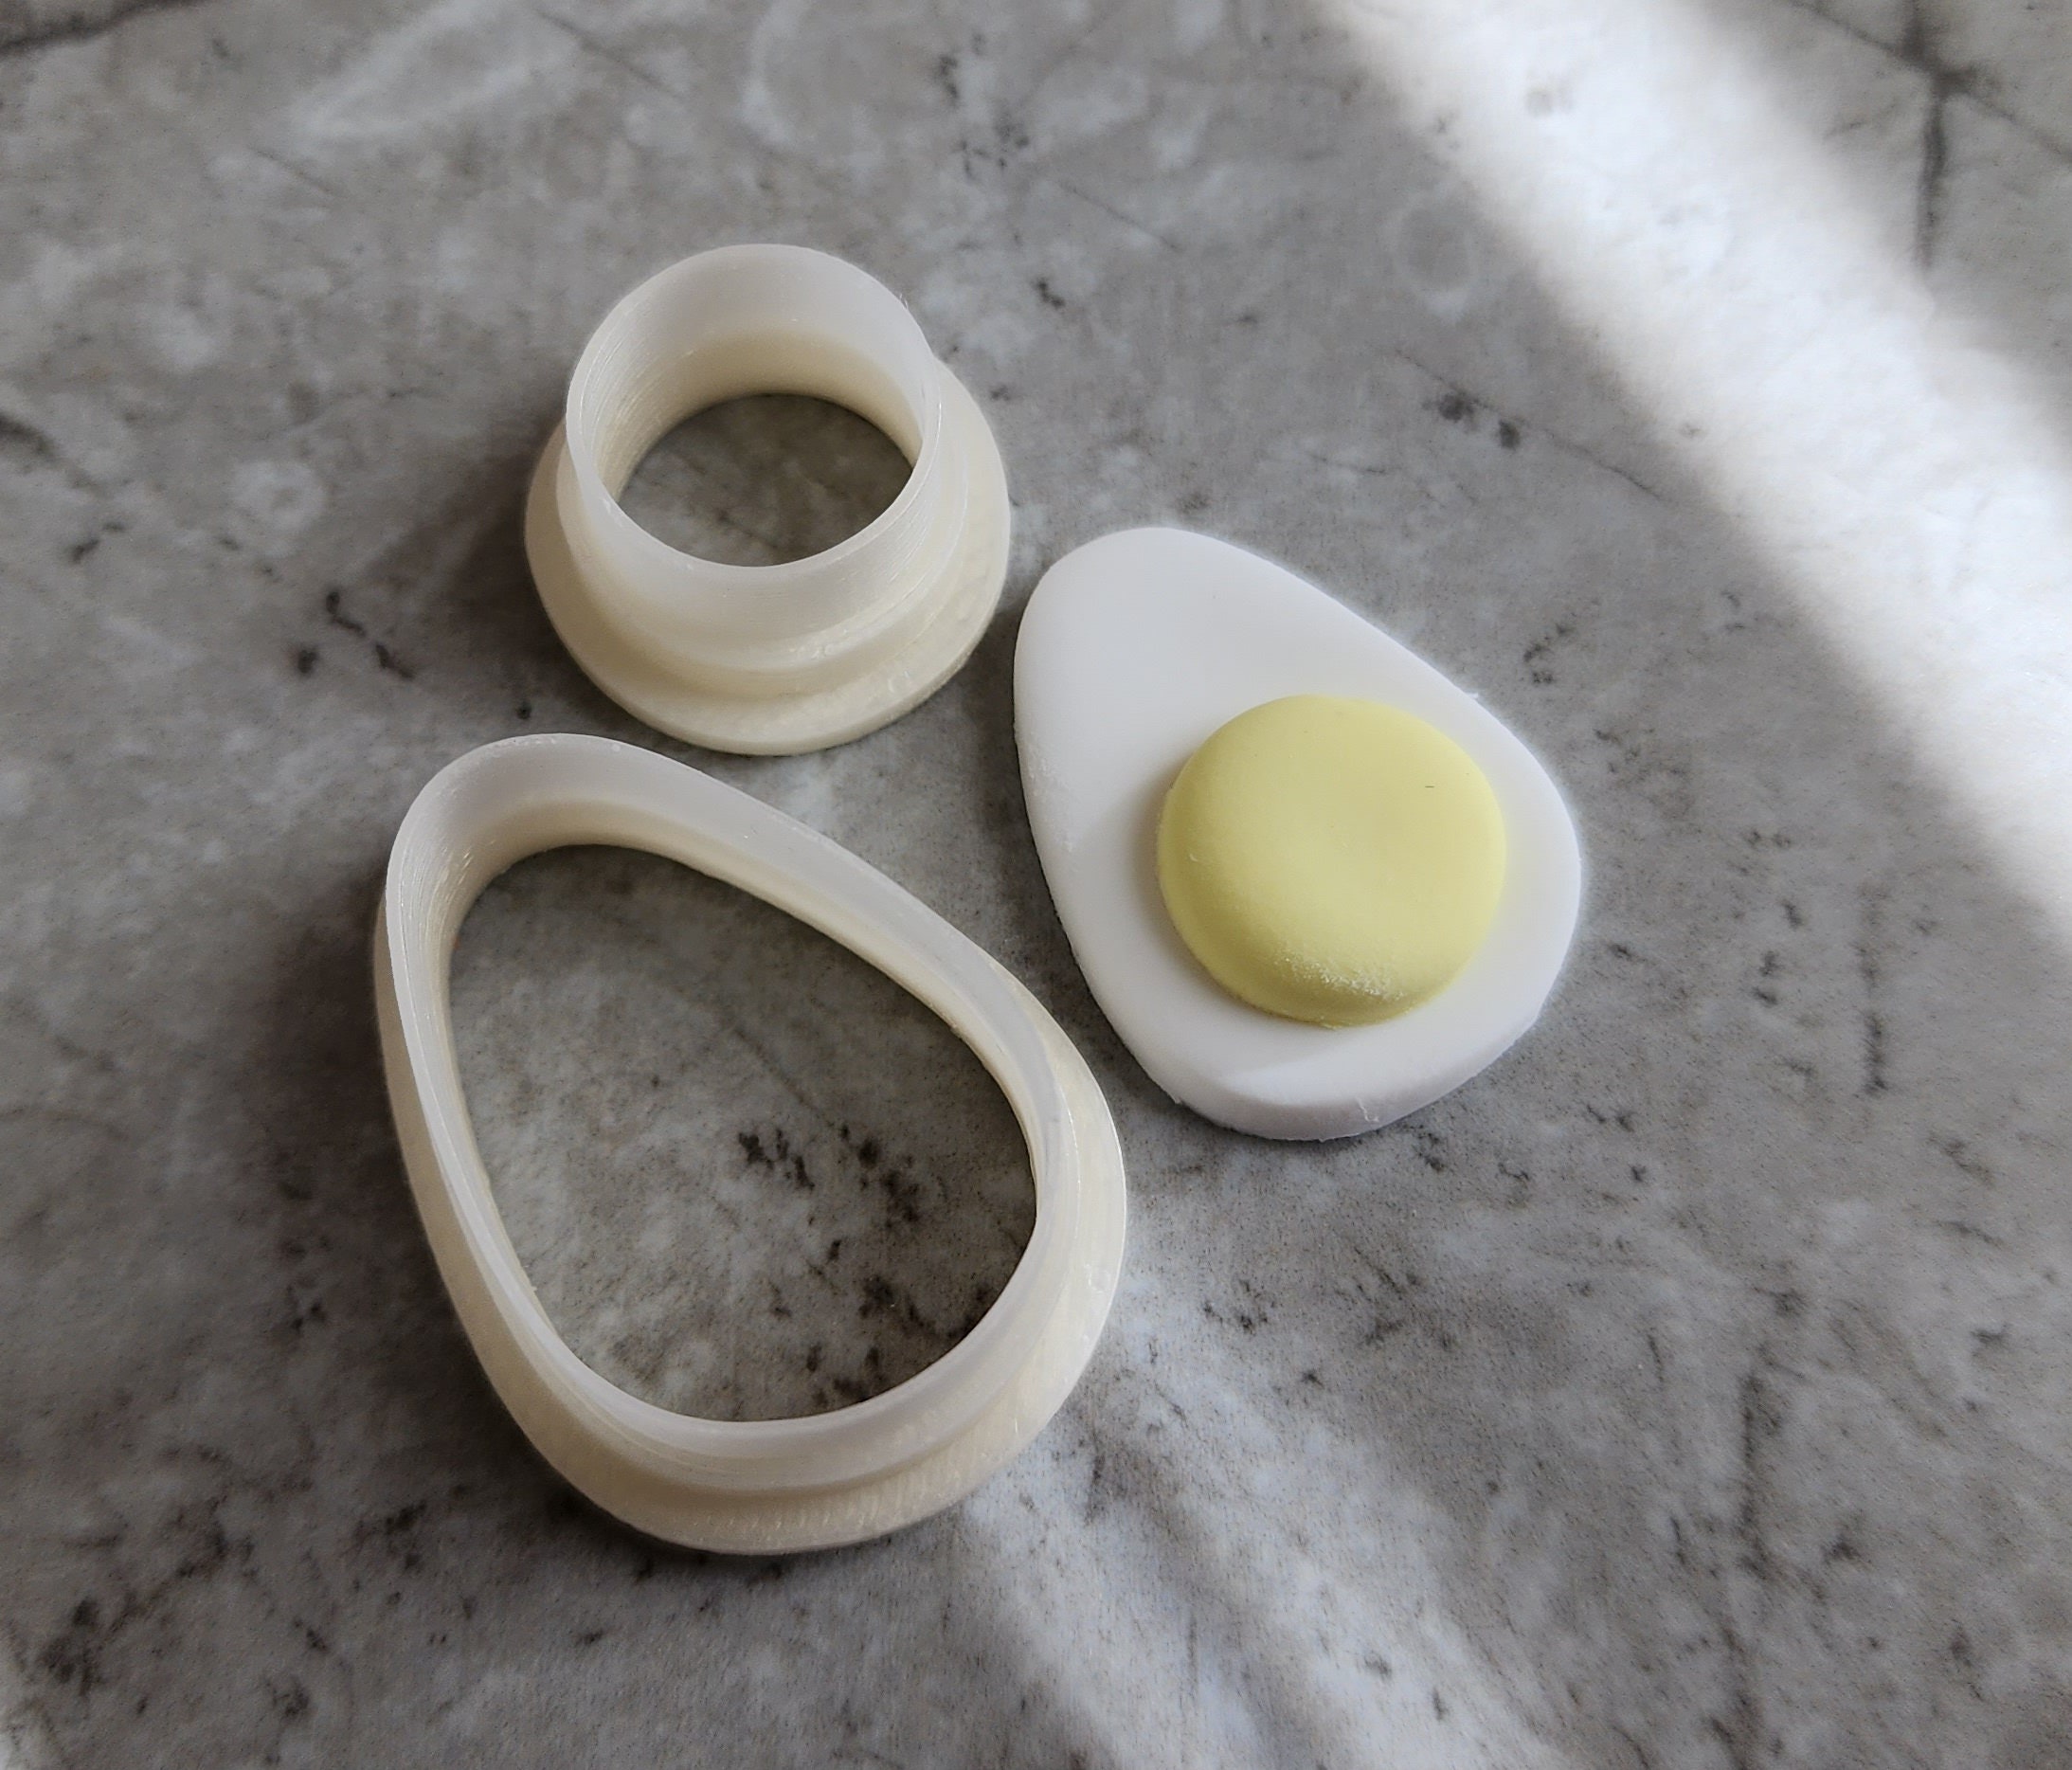 CHBC Fancy Cut Eggs Cooked Eggs Cutter Home Boiled Eggs Creative Cooking  Tools Bento Mold Kitchen Gadgets Accessories